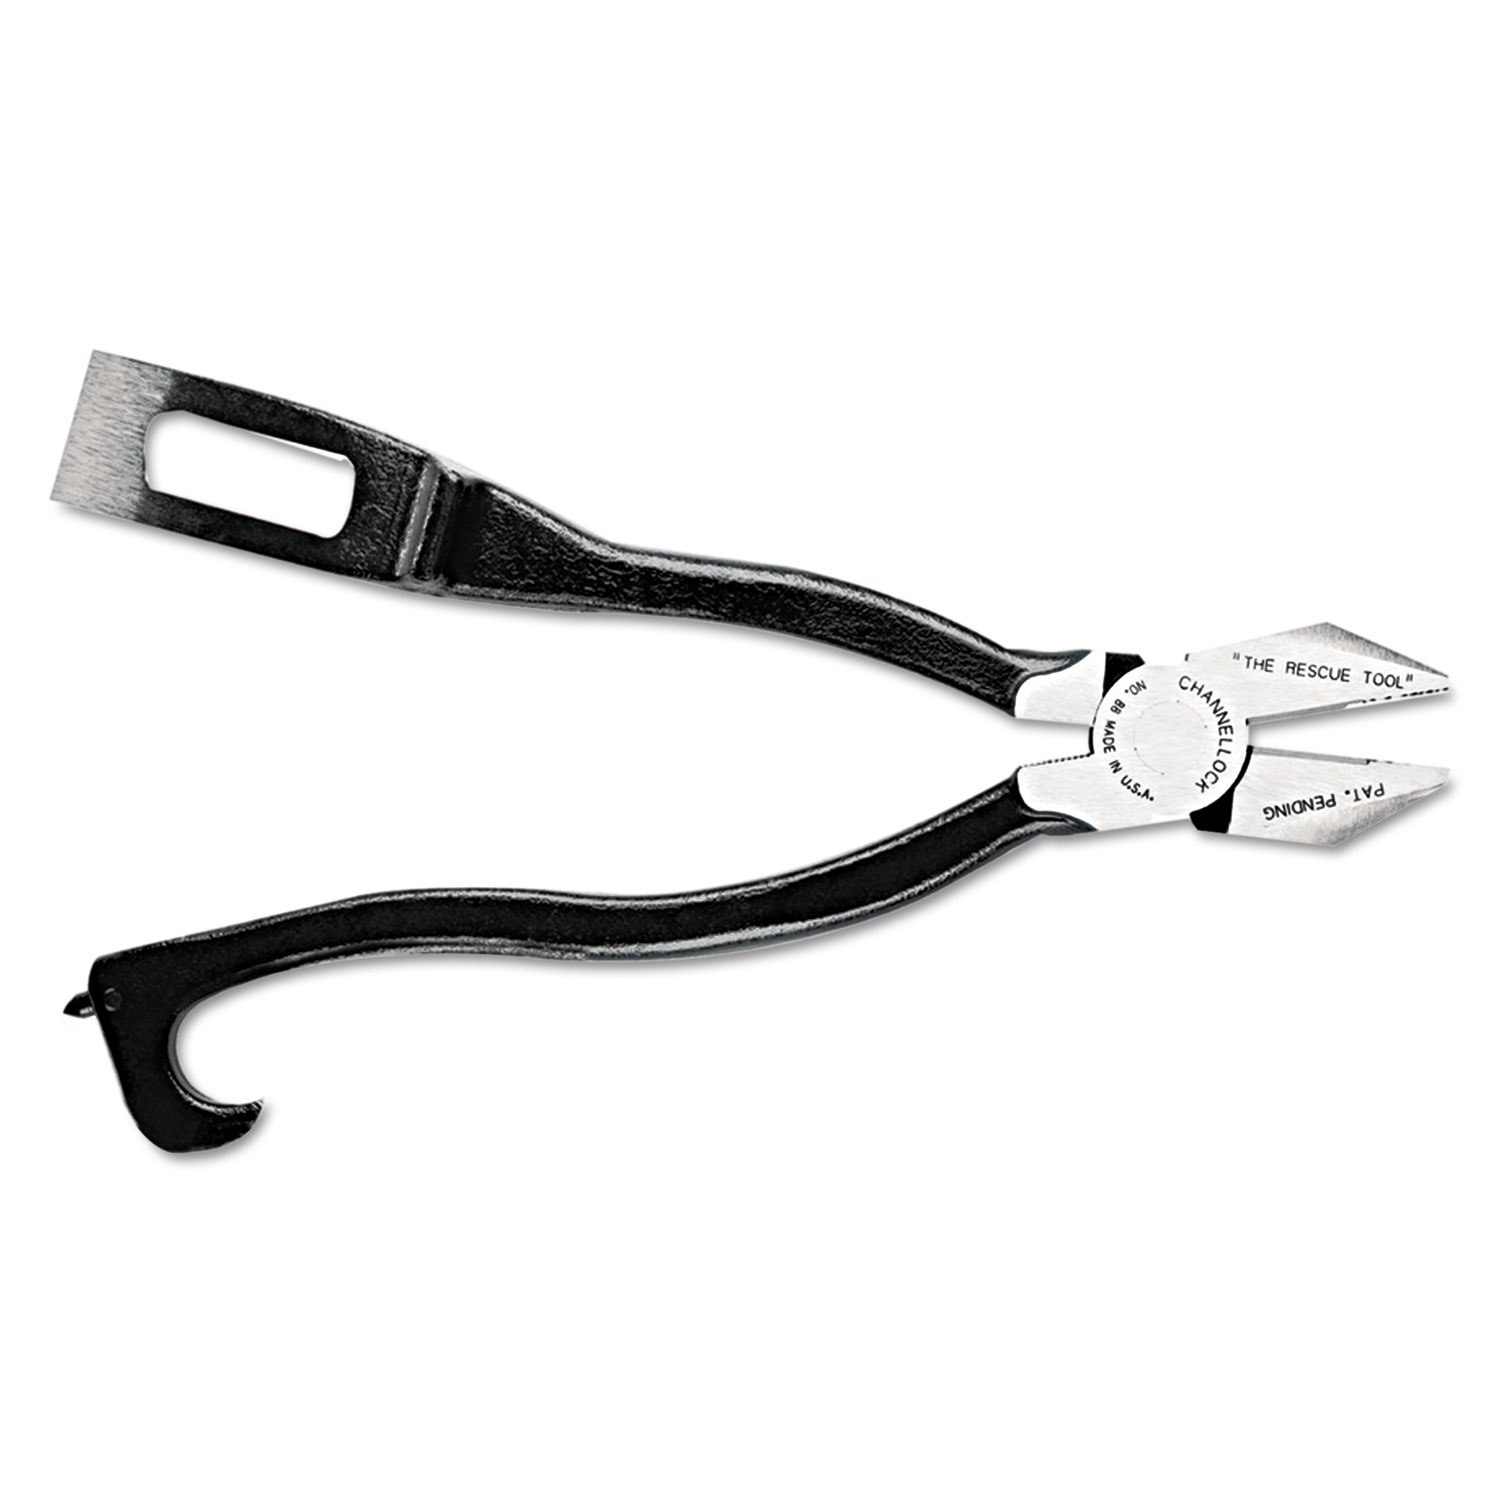 88 Rescue Tool, 10.46 Tool Length, 1.49 Jaw Length